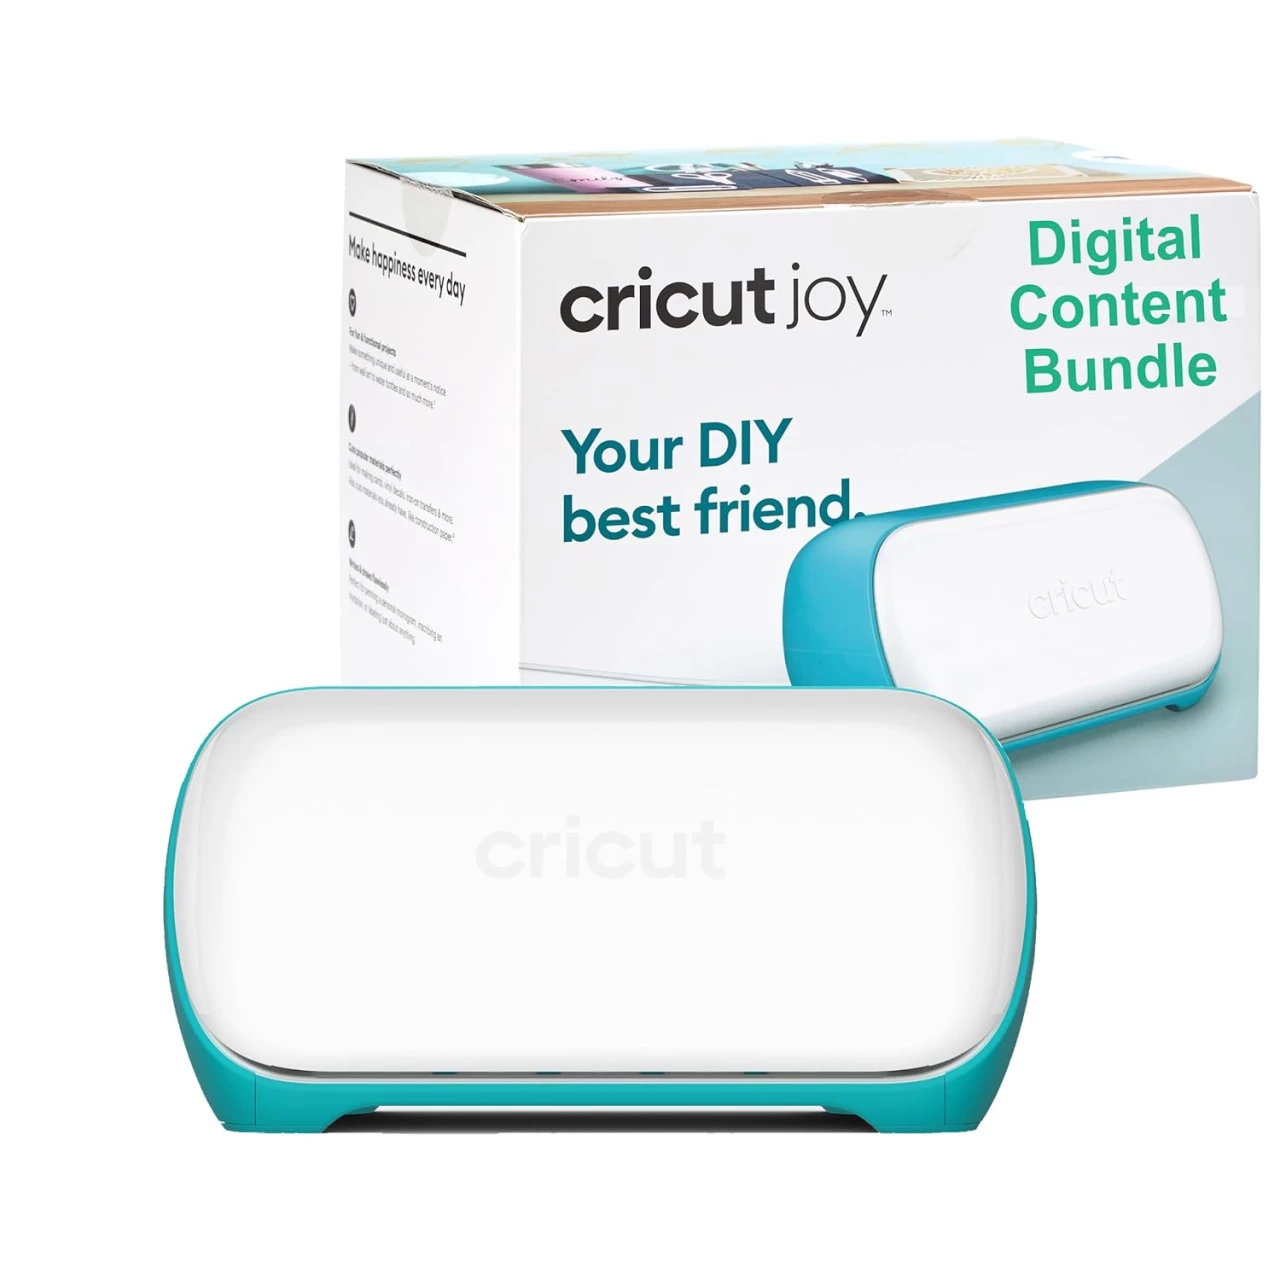 Cricut Joy Machine &amp; Digital Content Library Bundle - Includes 30 images in Design Space App - Portable DIY Smart Machine for creating customized cards, crafts, &amp; labels Blue